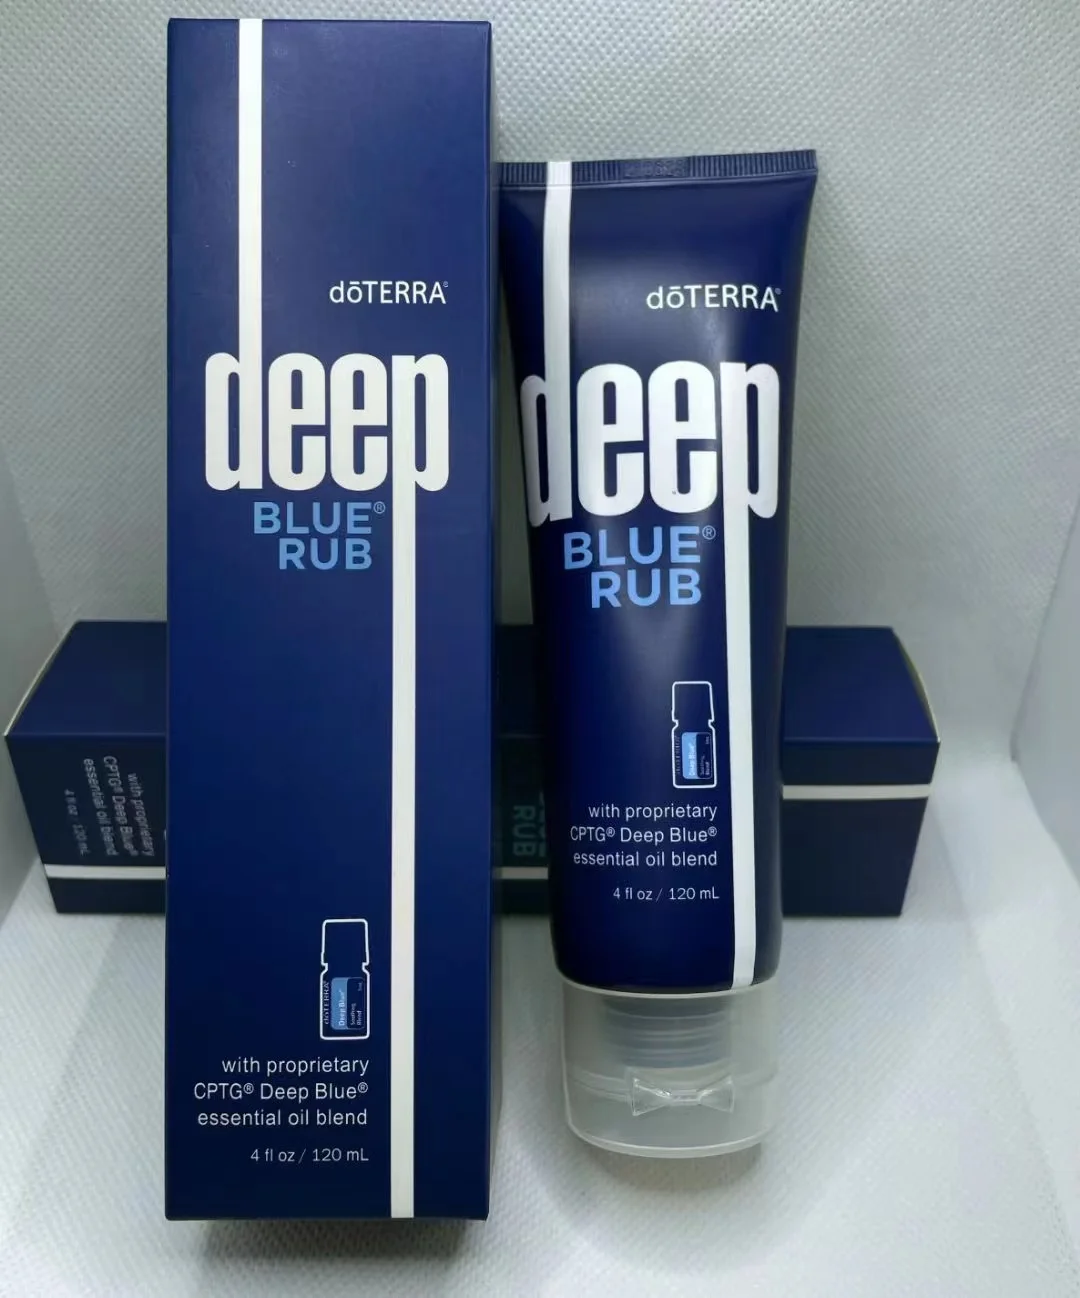 Creme deep blue rub doterra DOTERRA with proprietary face deep blue essential Soothing cream 120ml Dropship Whosales